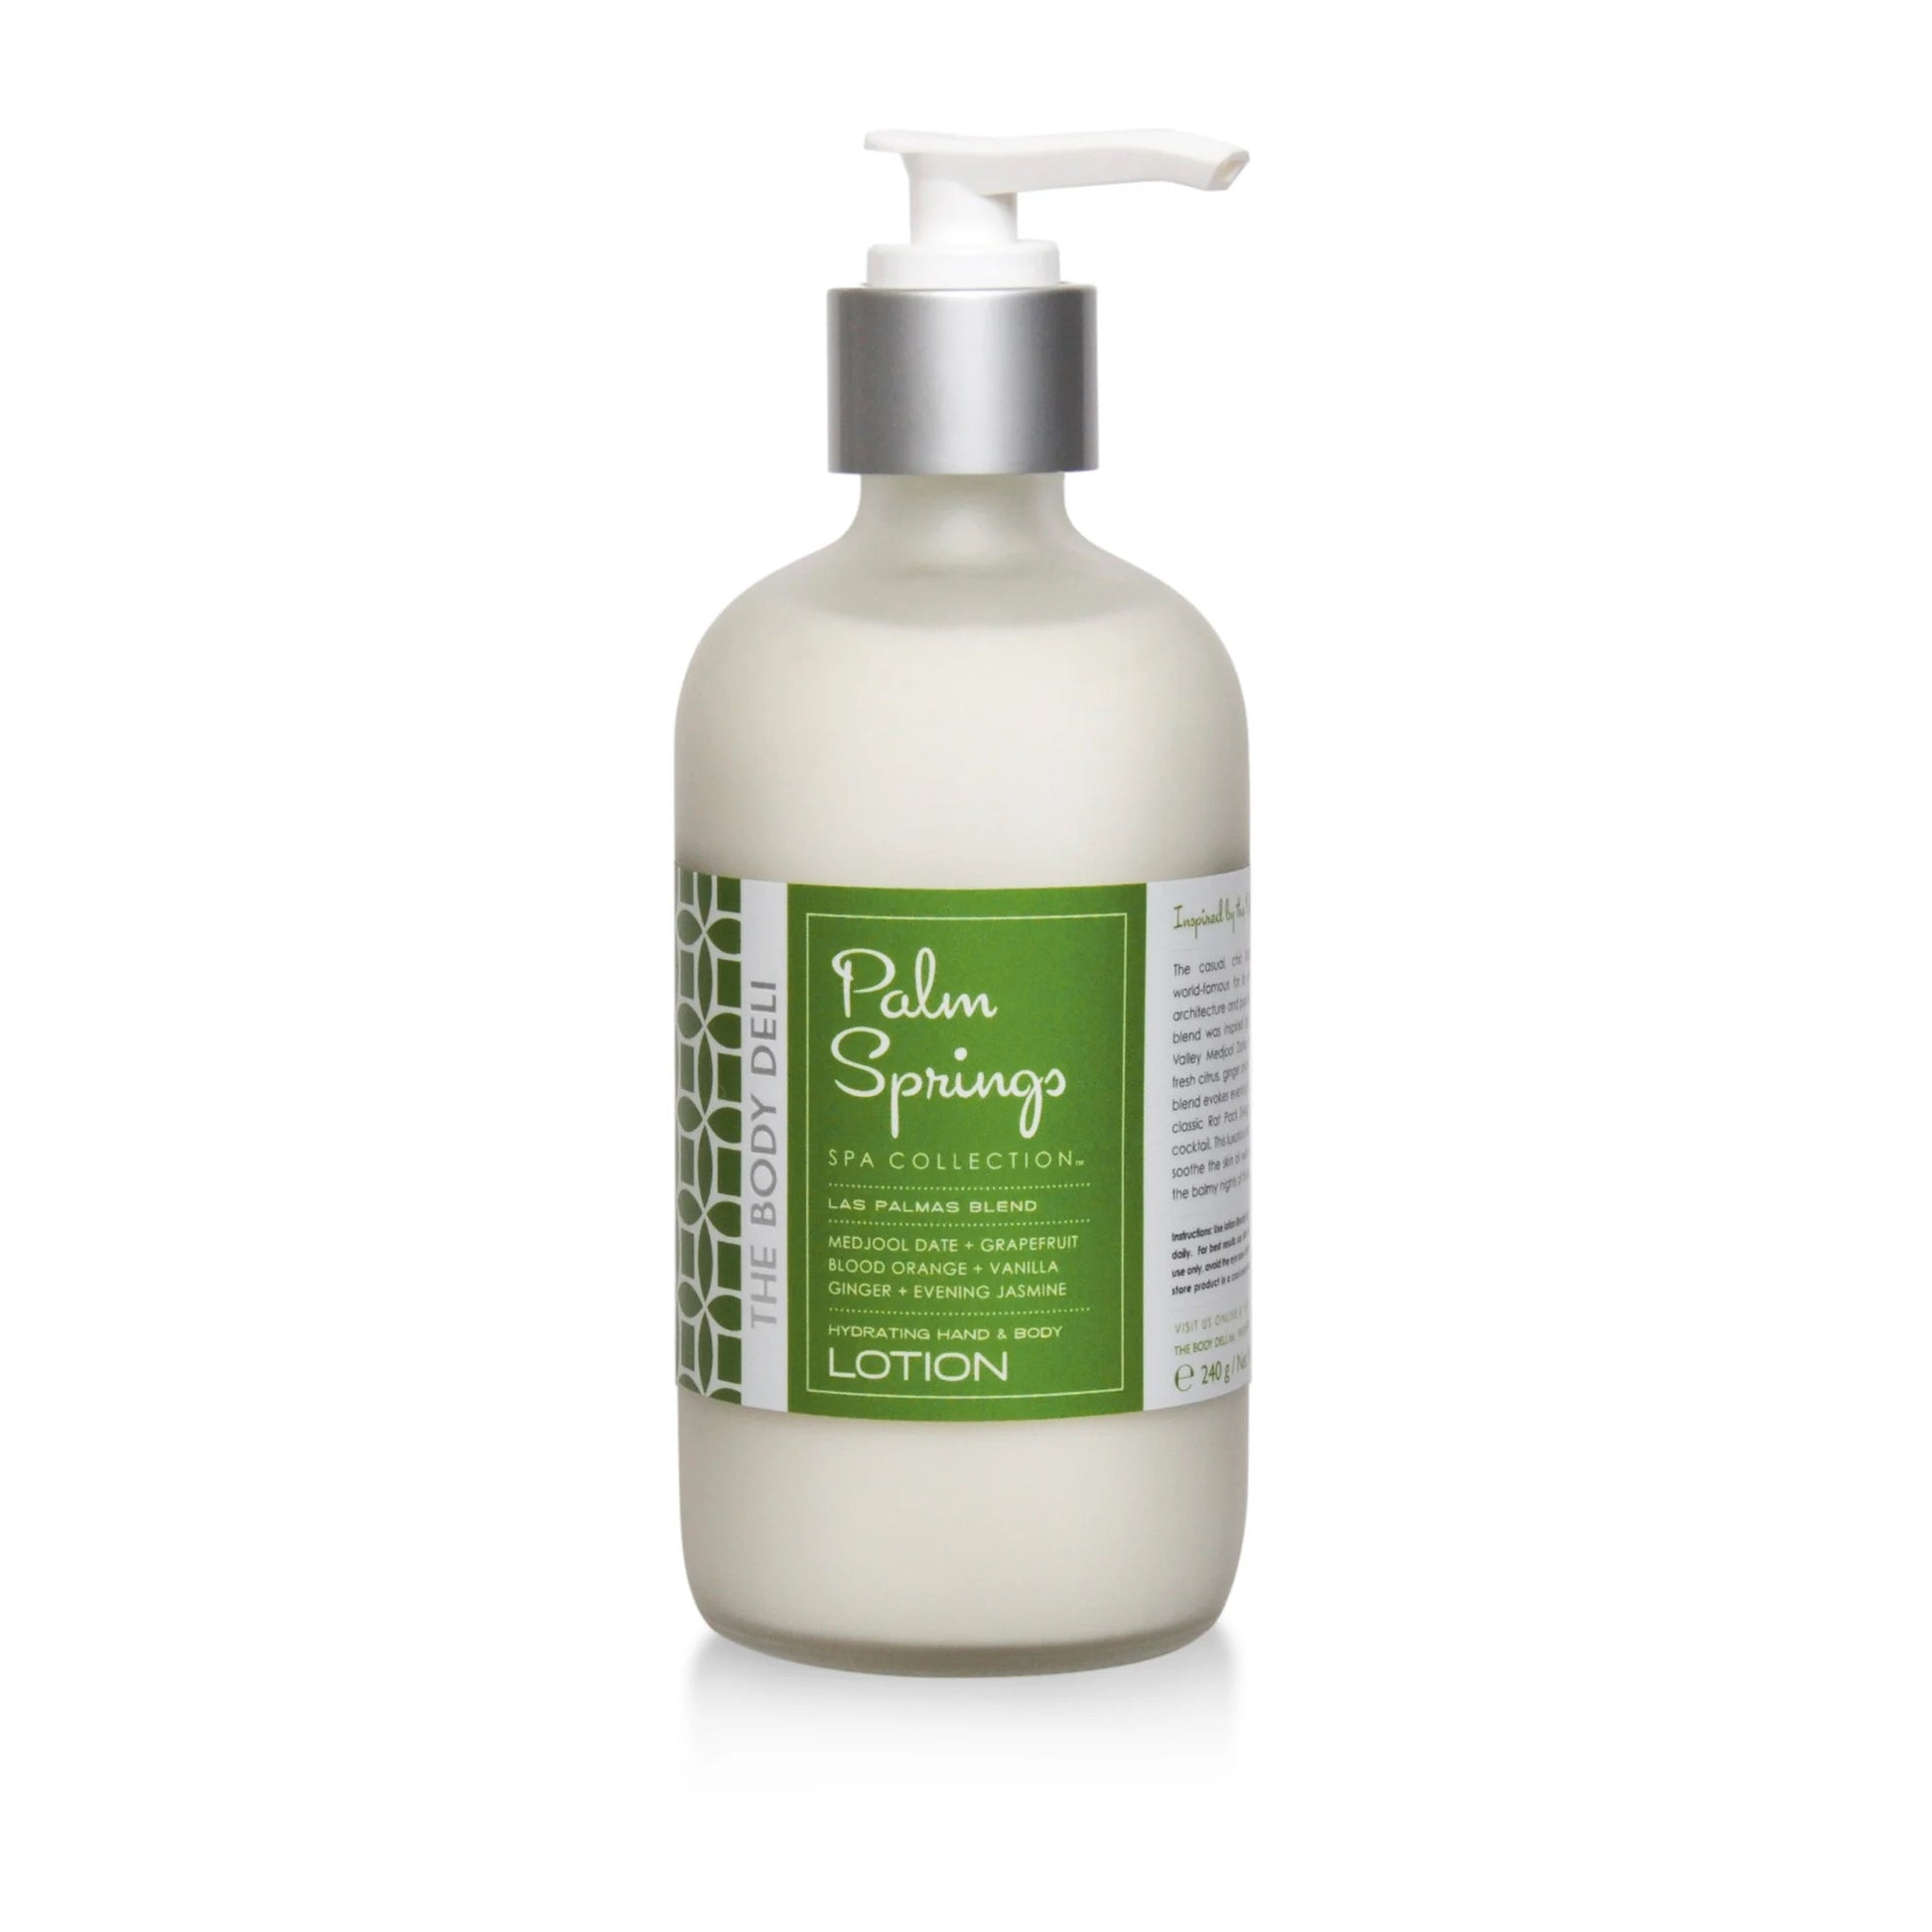 THE BODY DELI PALM SPRINGS Hand & Body Lotion